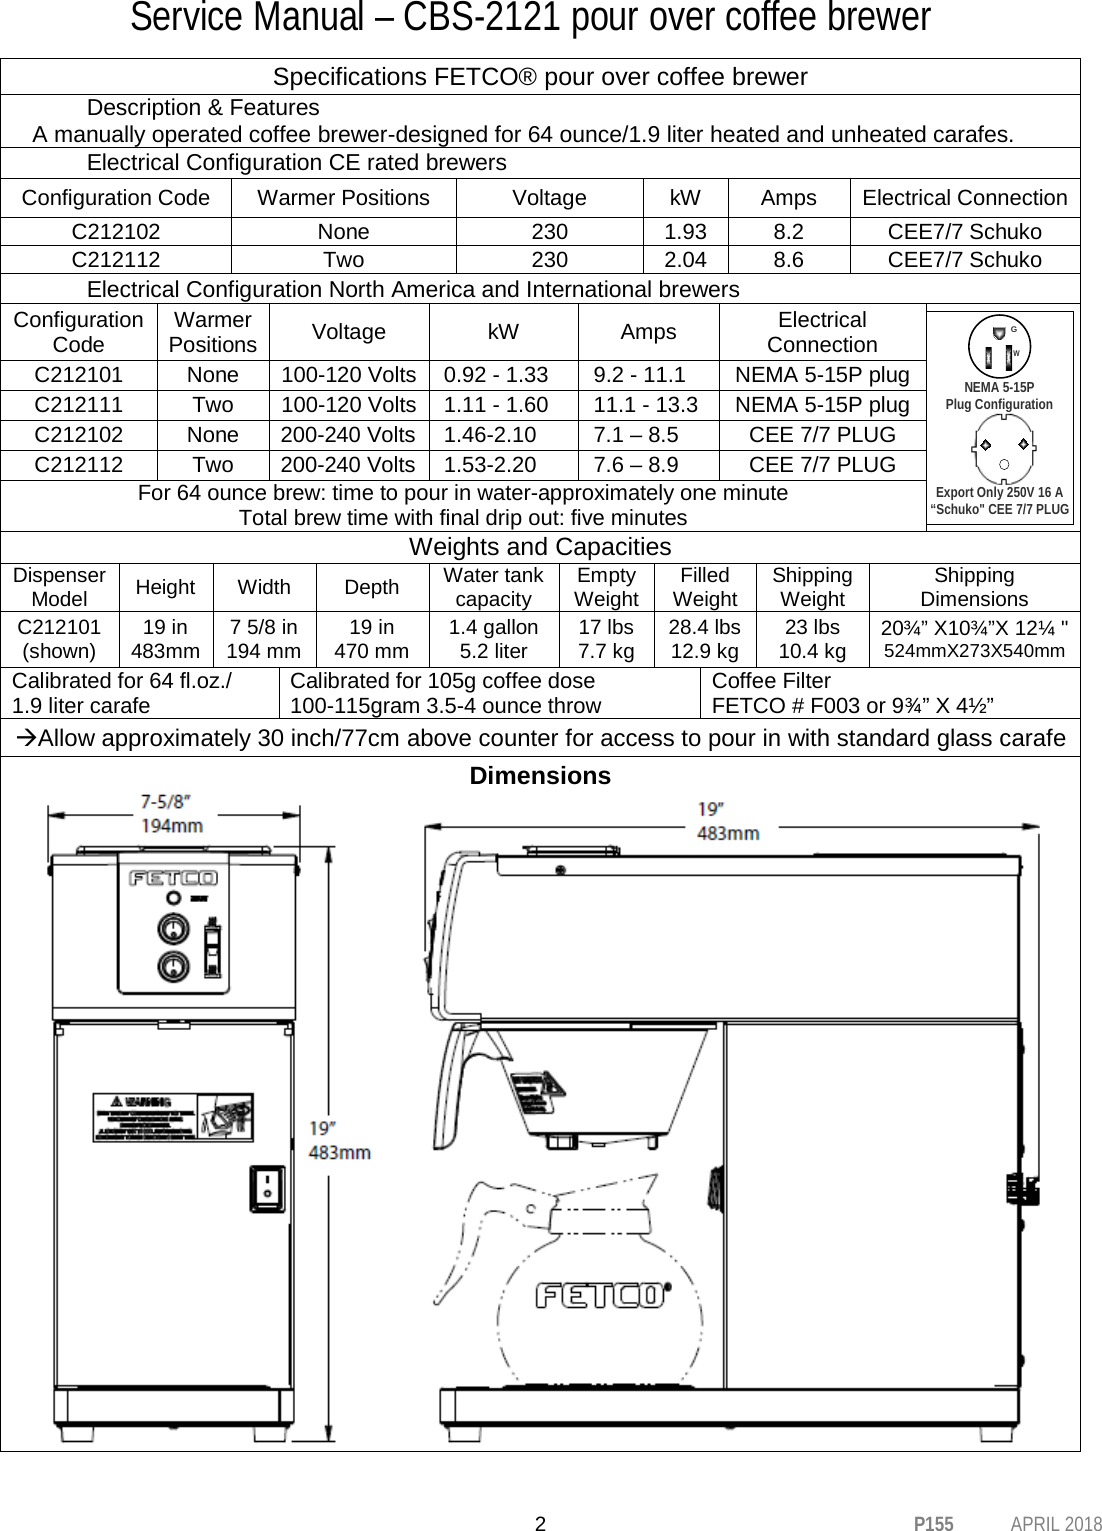 Page 2 of 10 - Cbs2121-user-manual